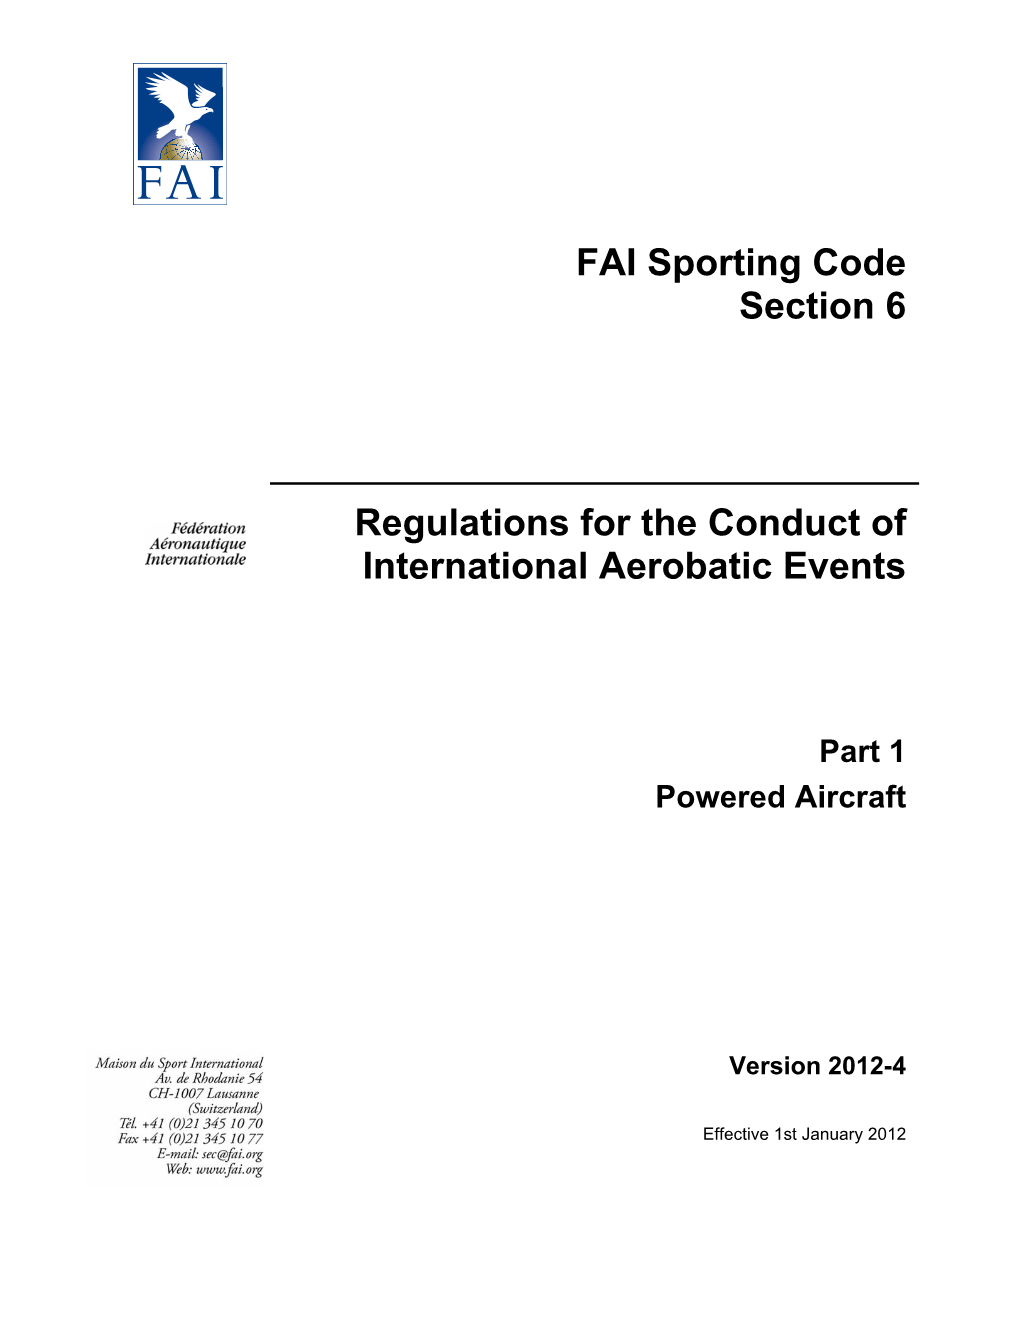 FAI Sporting Code Section 6 Regulations for the Conduct Of